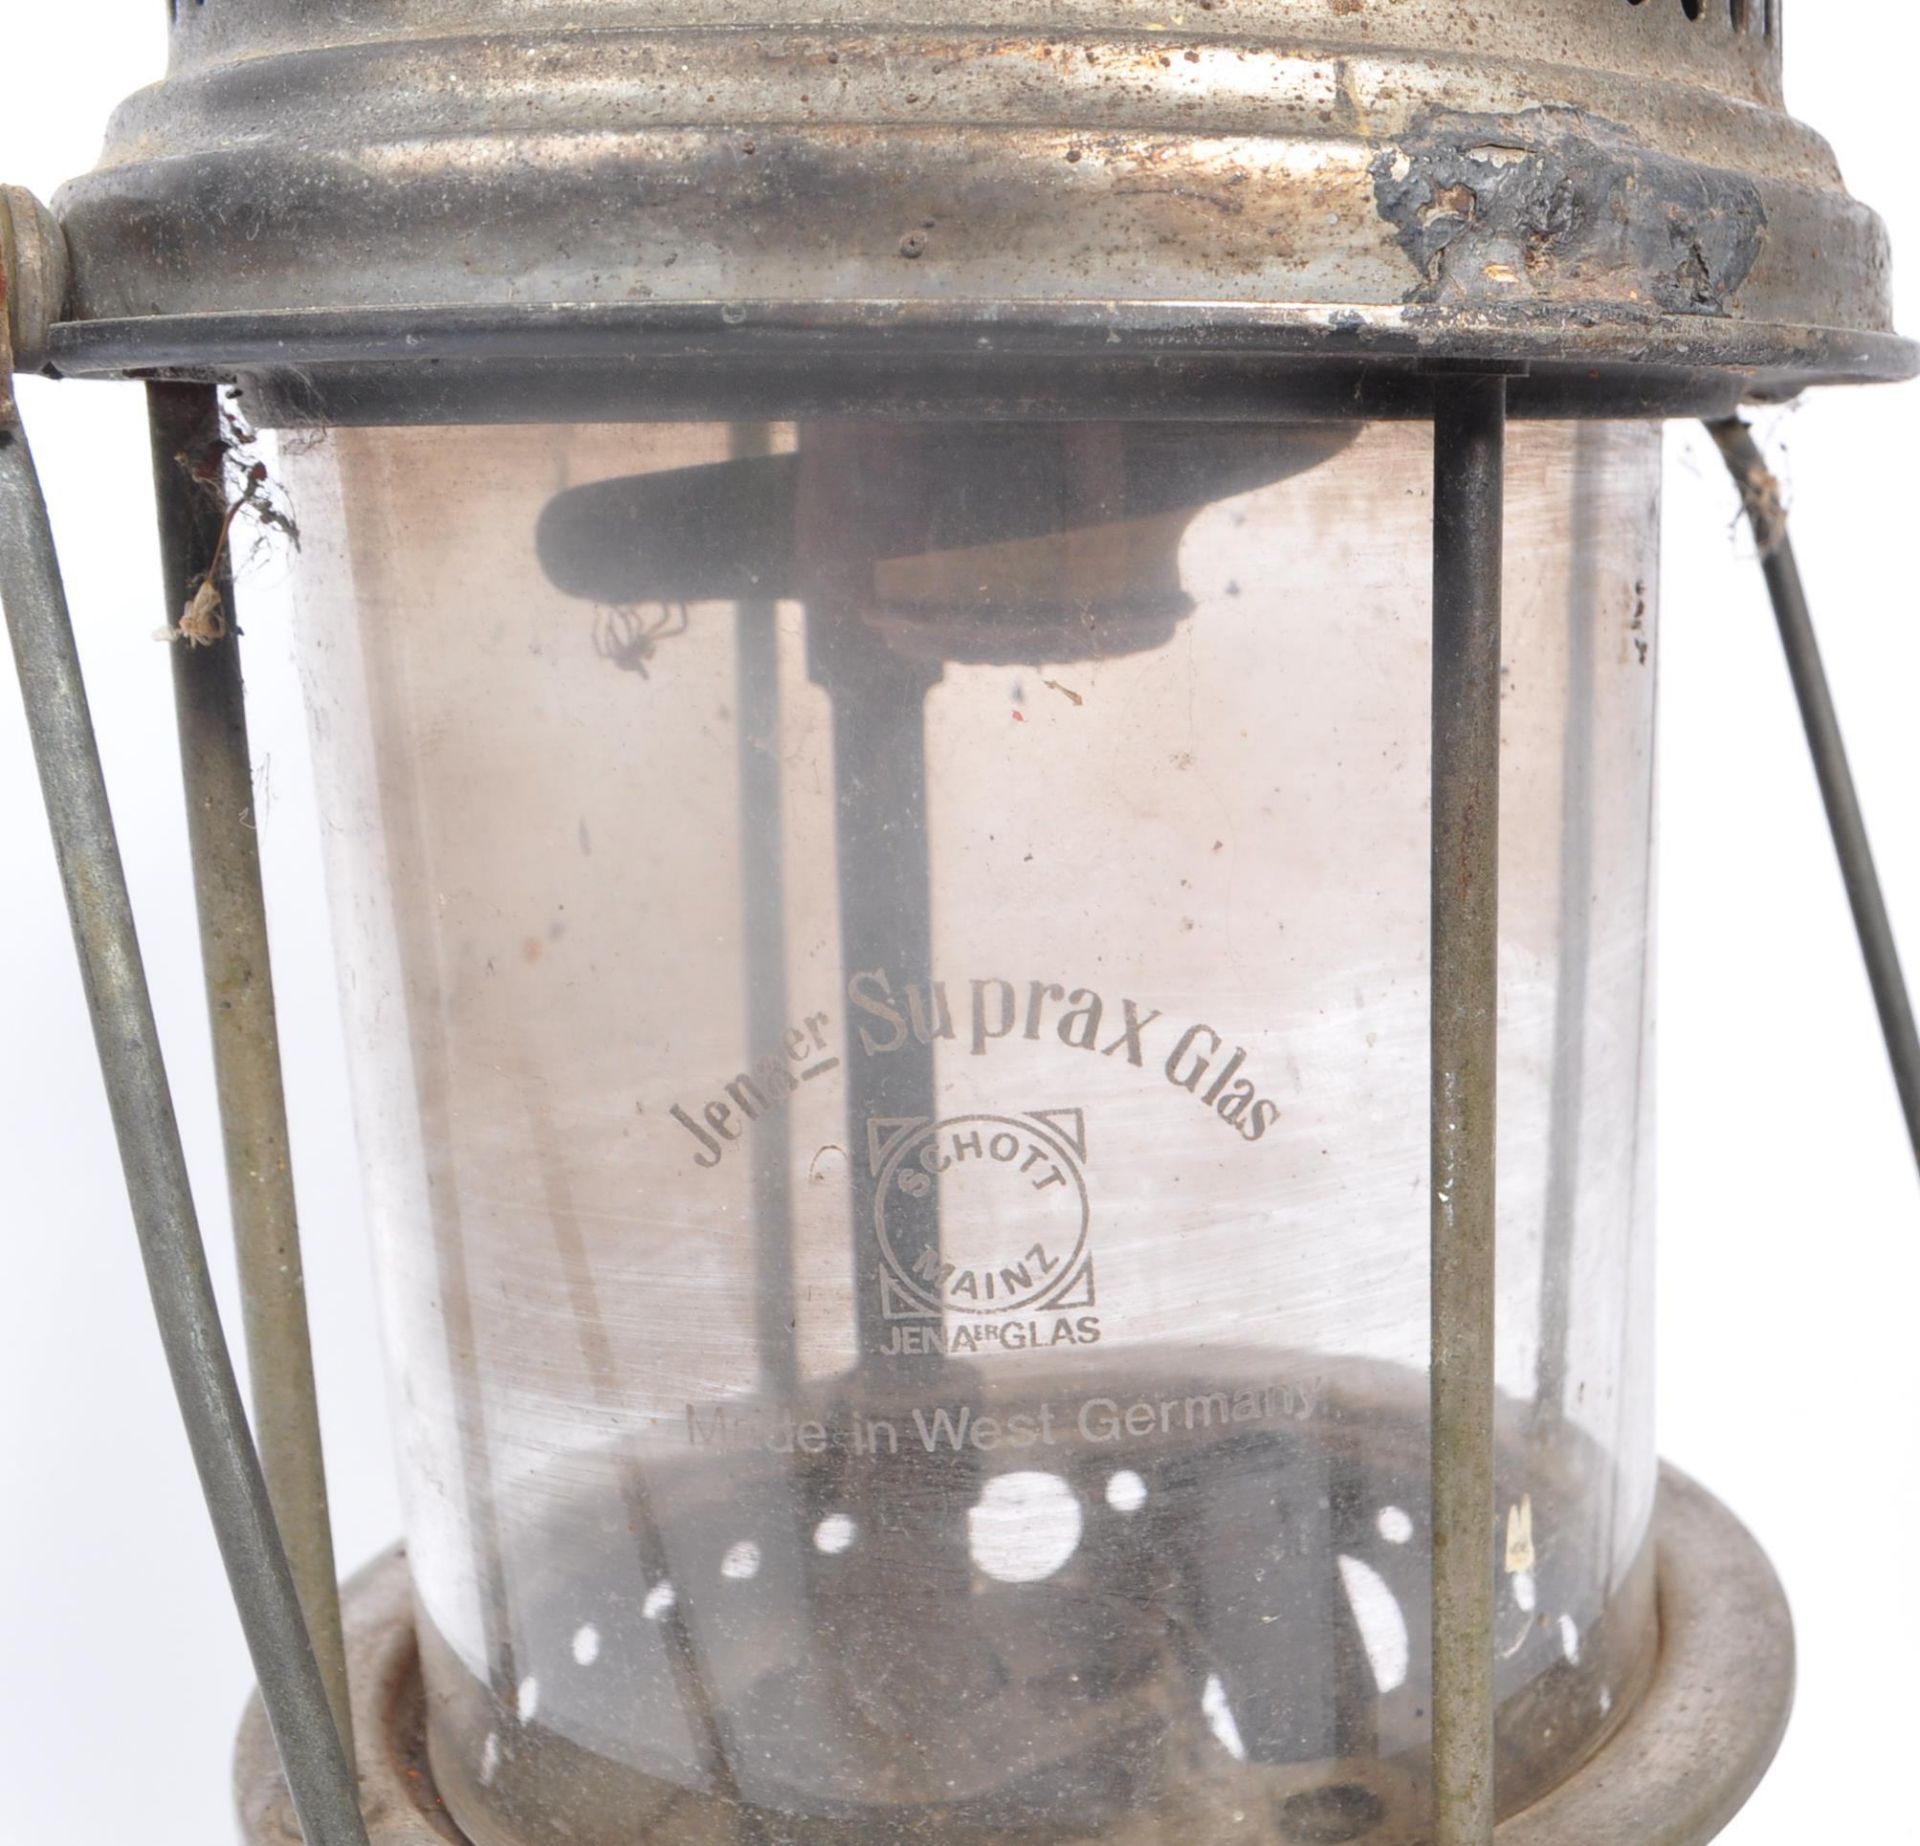 HIPOLITO - 20TH CENTURY H-502 AUTOMATIC PARAFFIN LAMP - Image 5 of 8